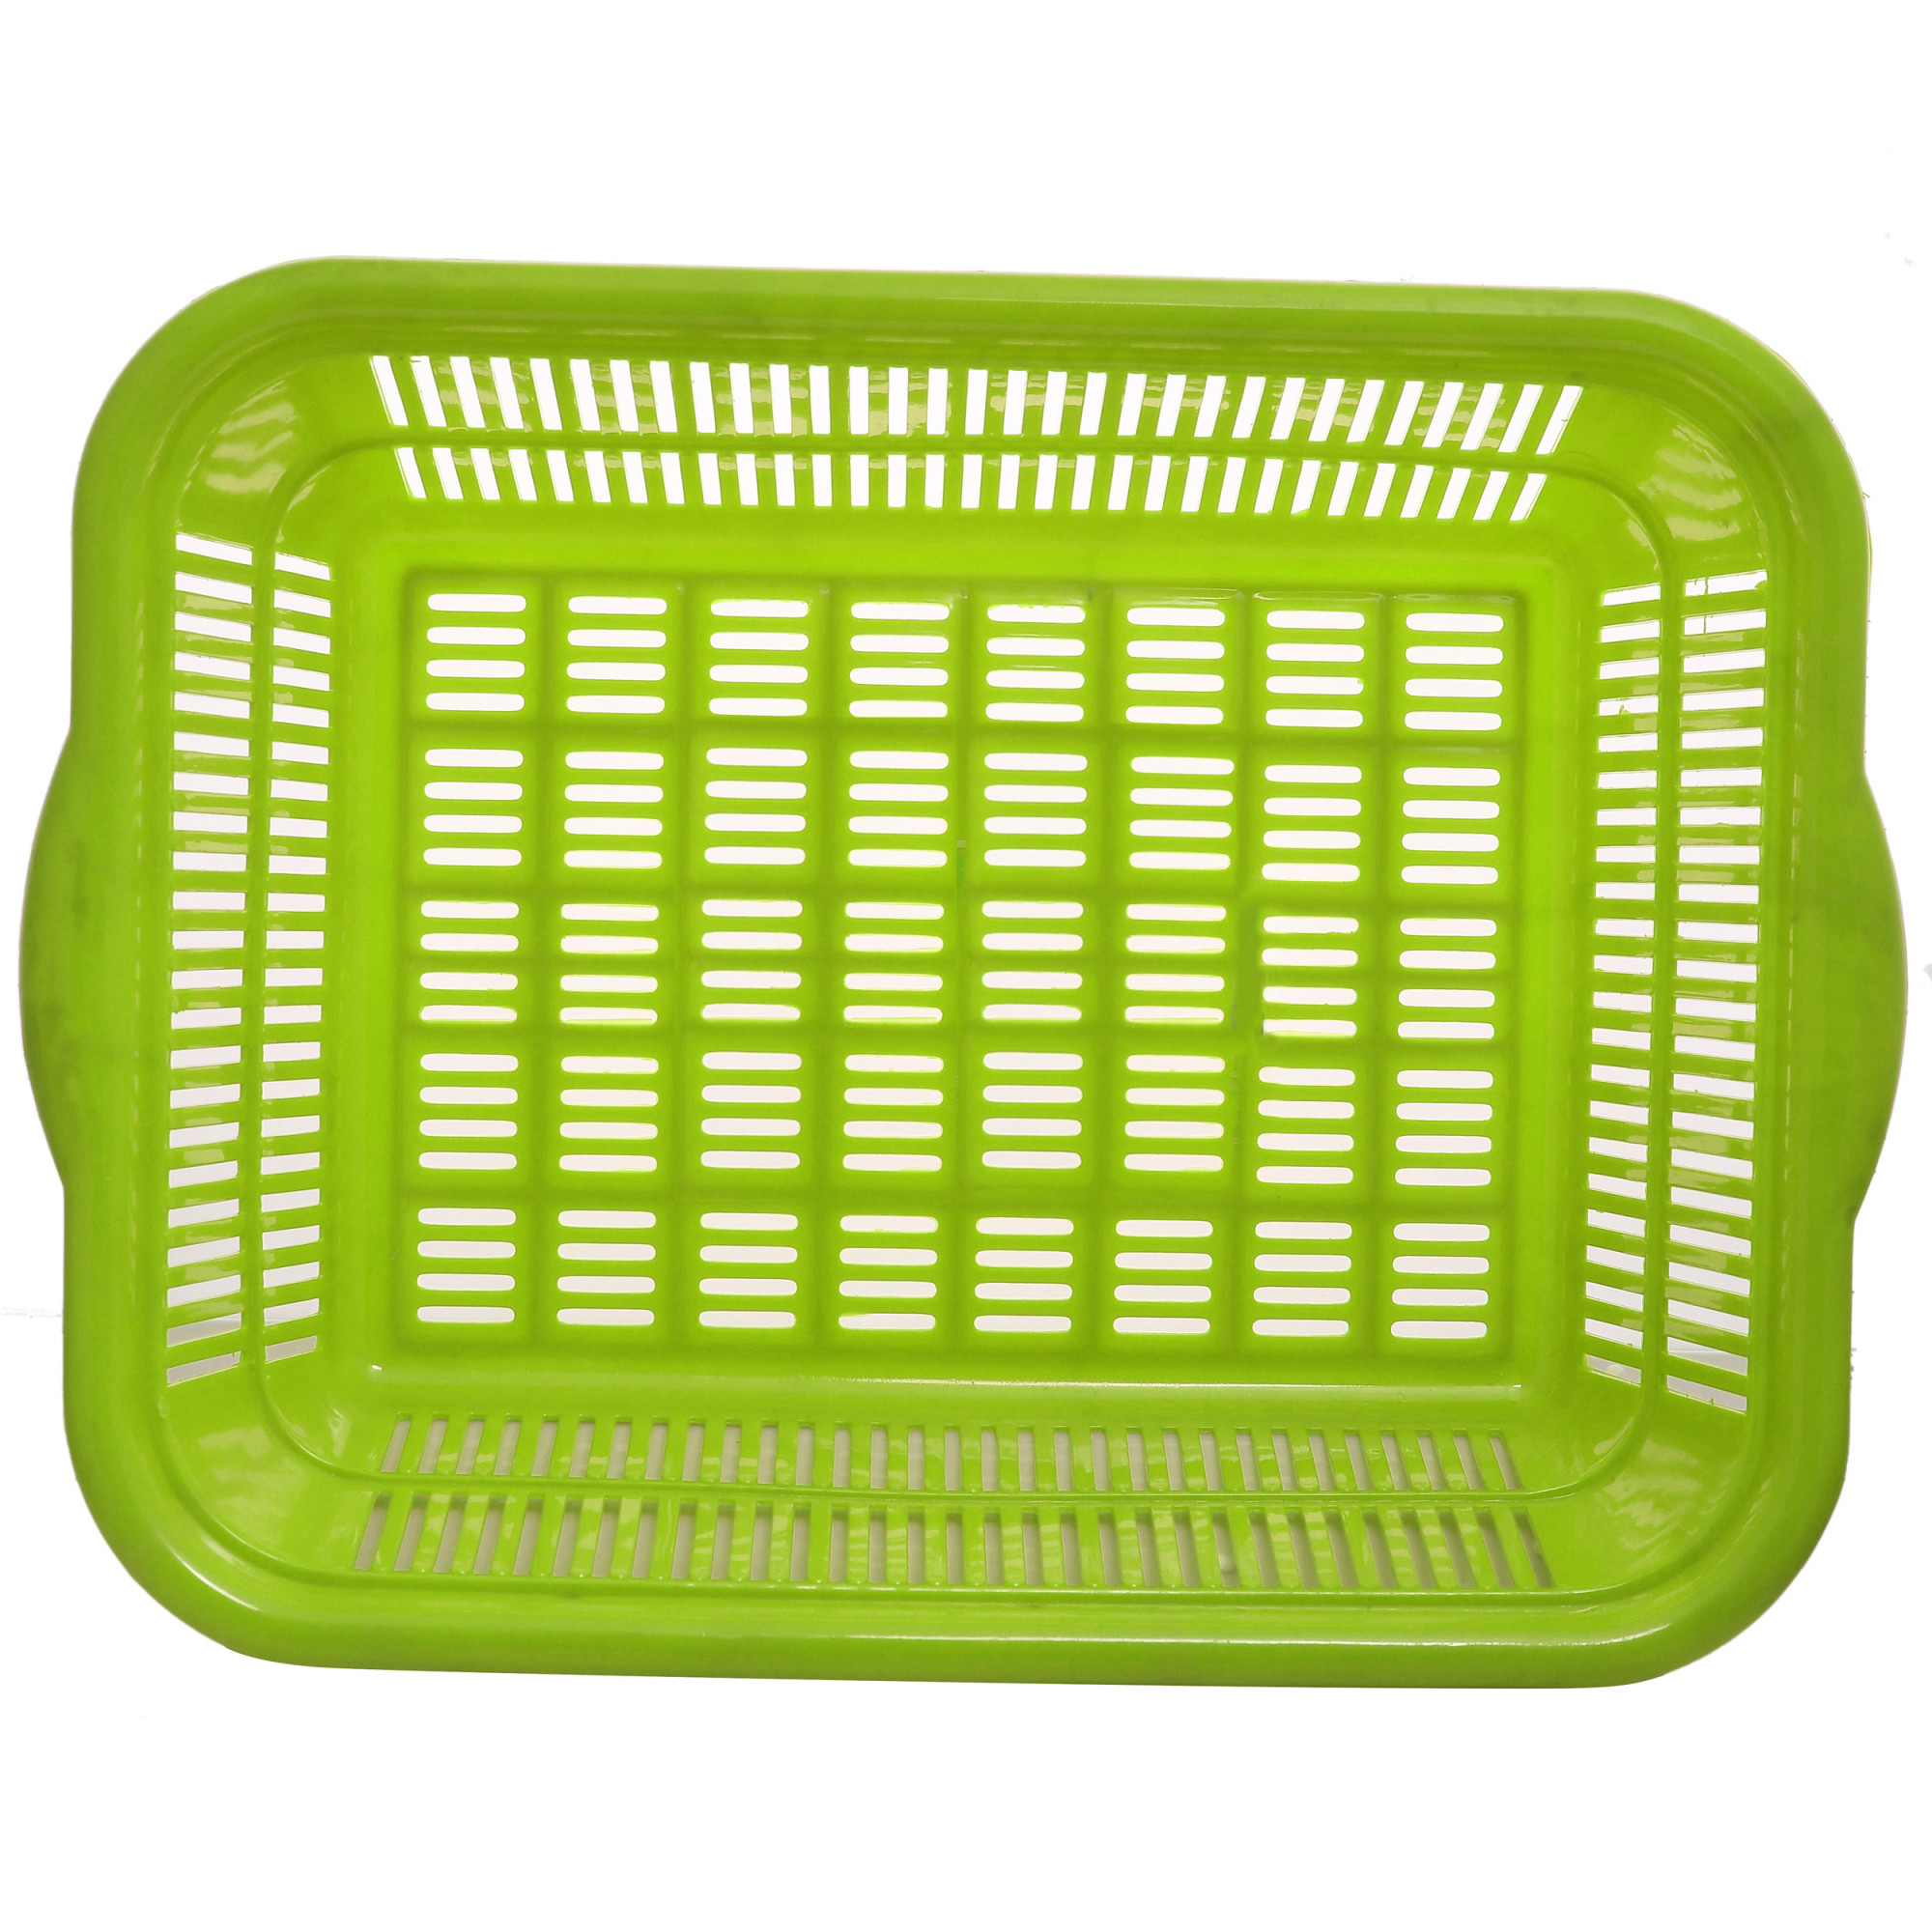 Kuber Industries 2 Pieces Plastic Kitchen Dish Rack Drainer Vegetables And Fruits Basket Dish Rack Multipurpose Organizers ,Large Size,Green & Red